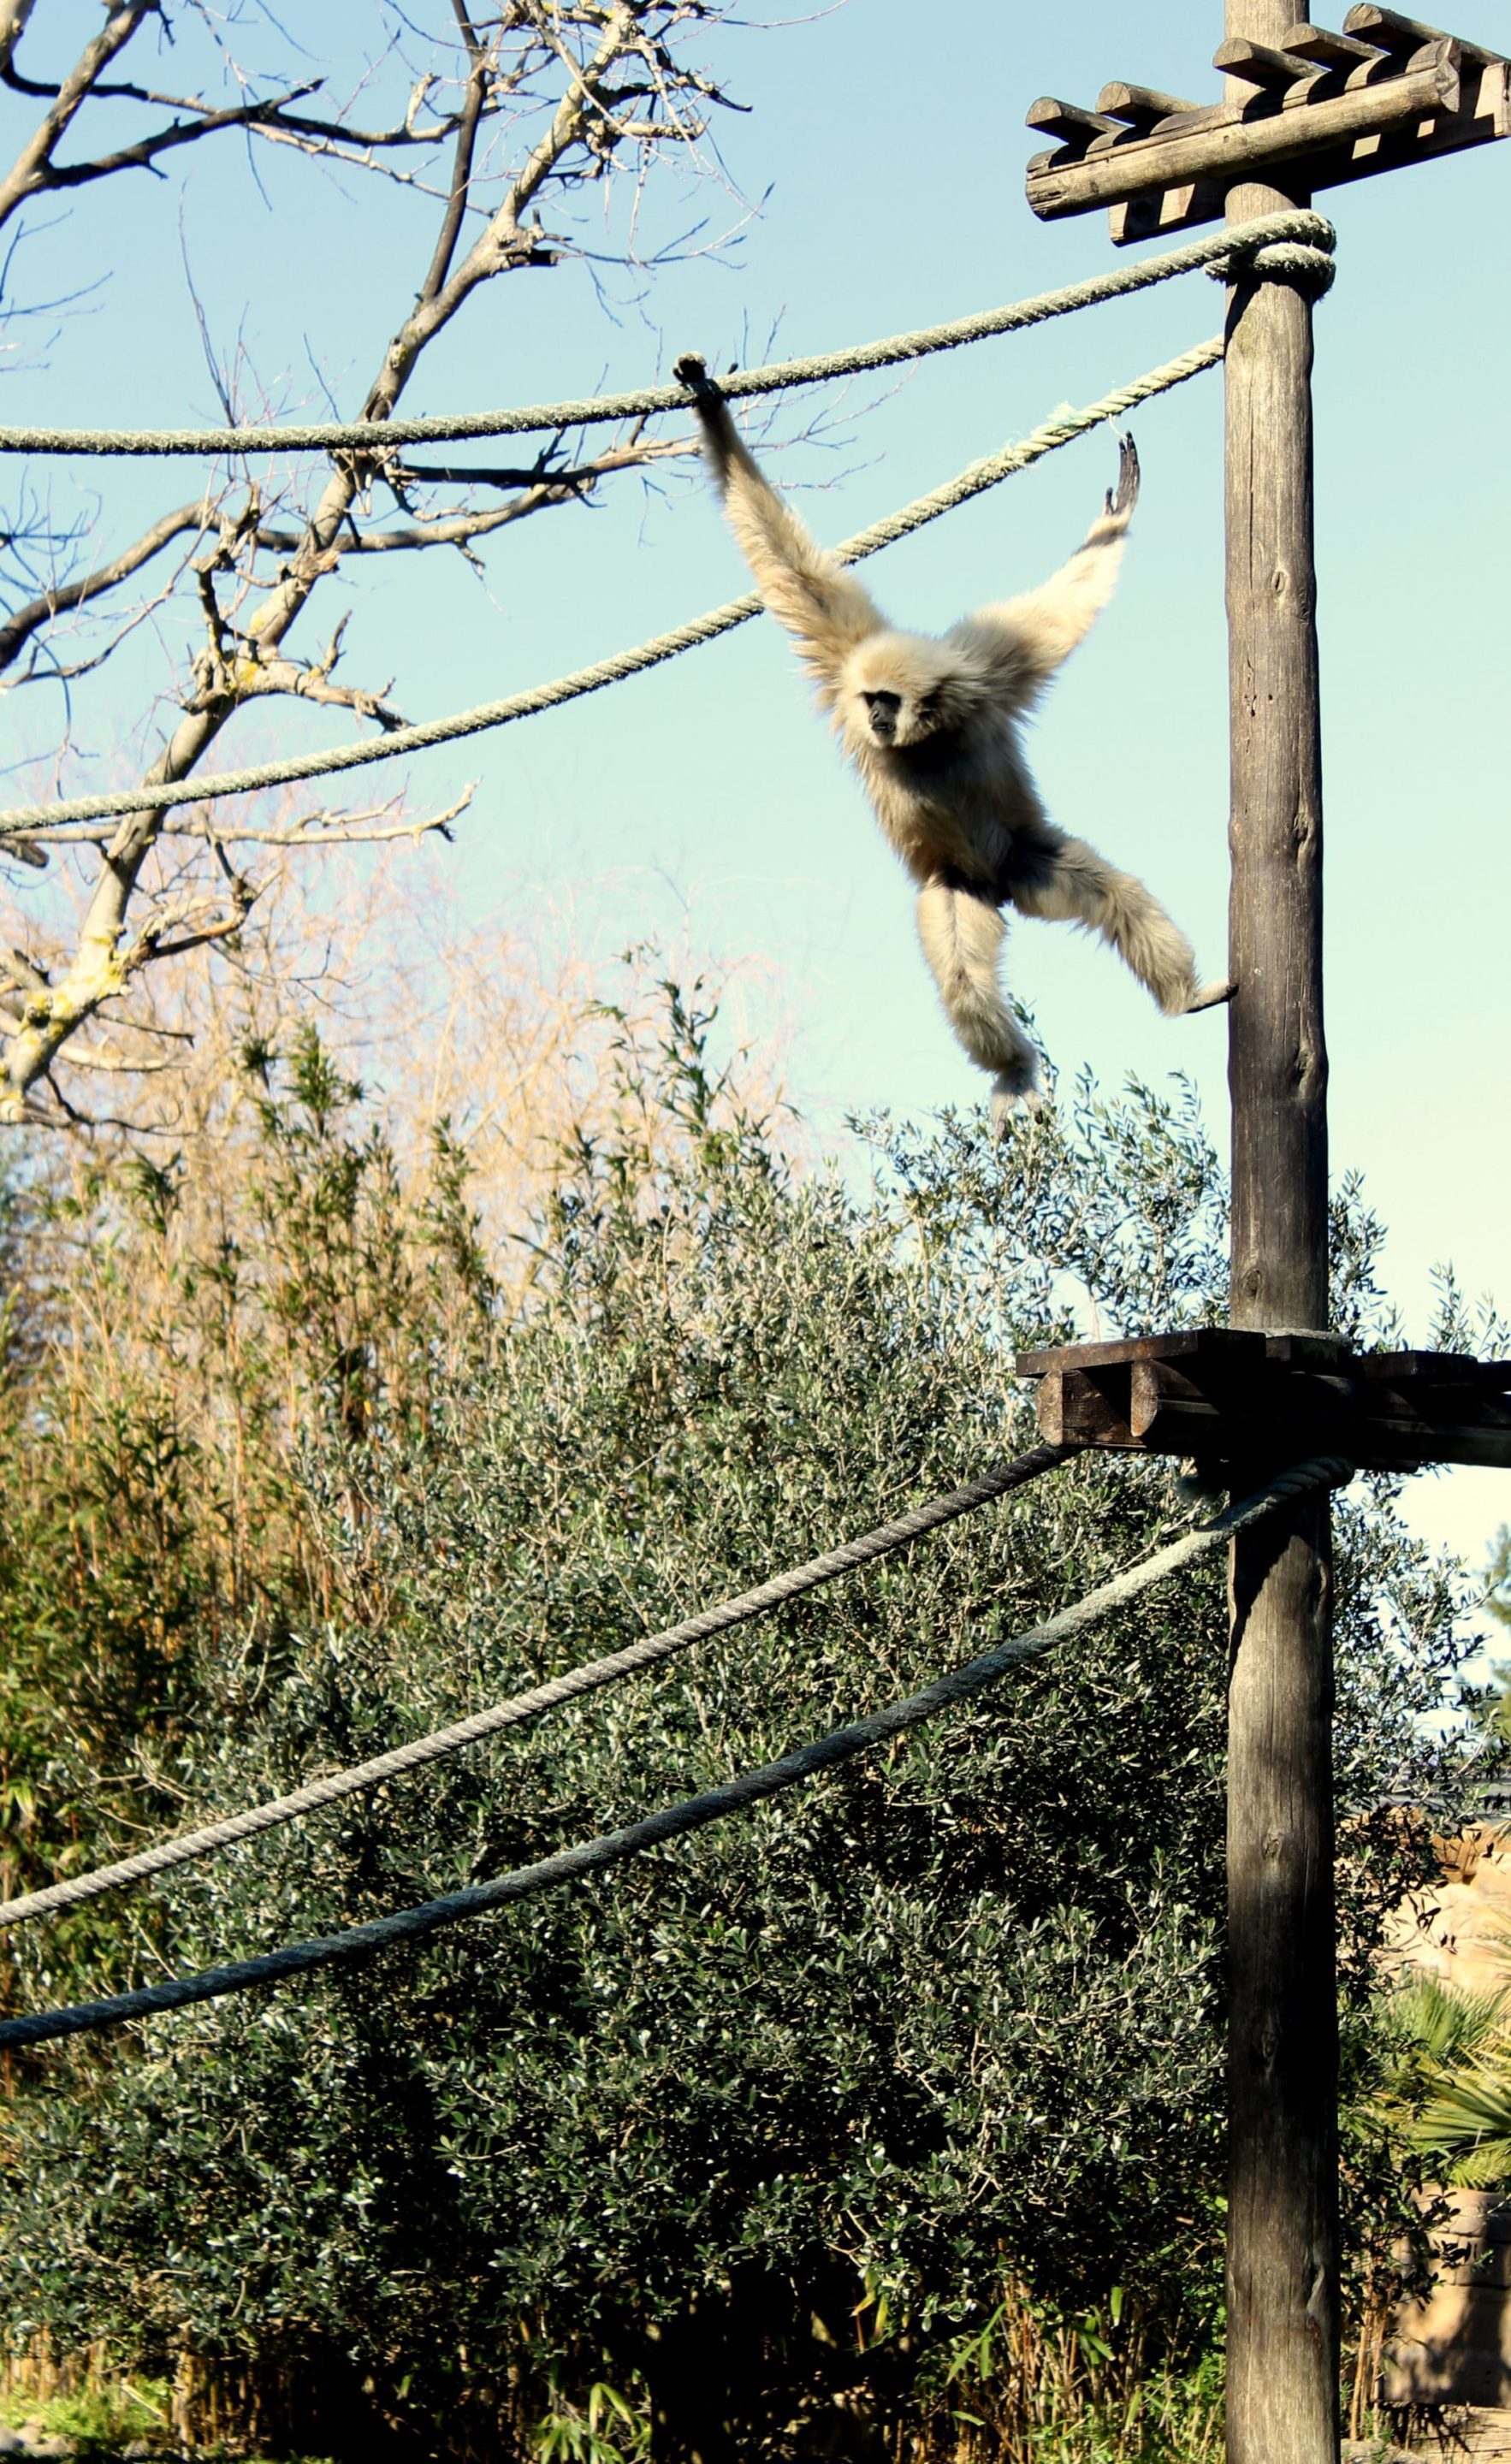 Children of all ages will be delighted by the active monkeys at Zoo de Lagos.